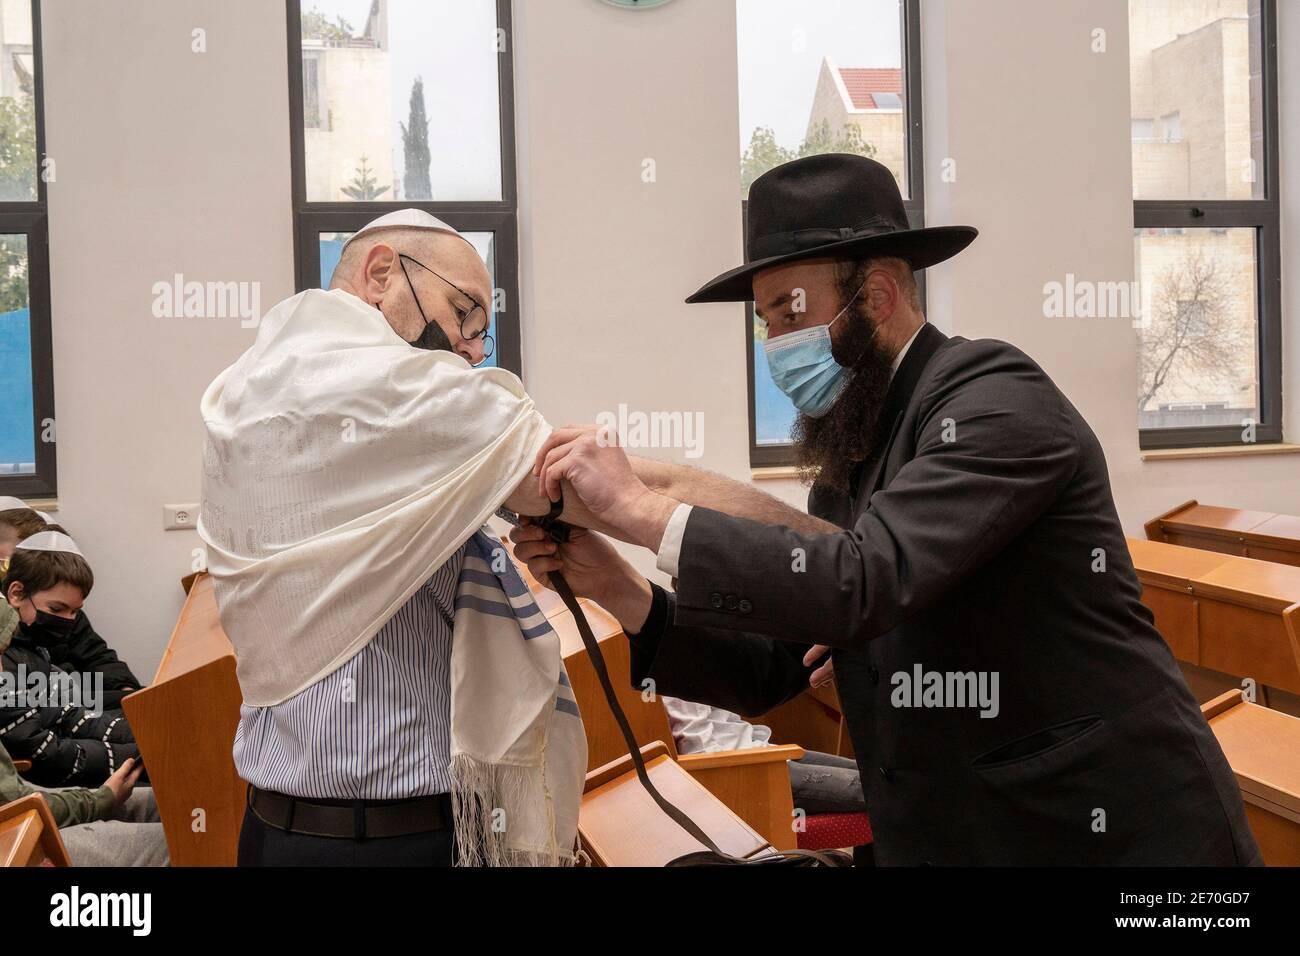 Jerusalem, Israel - January 28th, 2020: A rabbi helps a man with his tefillin in a synagogue, both wearing protective masks Stock Photo